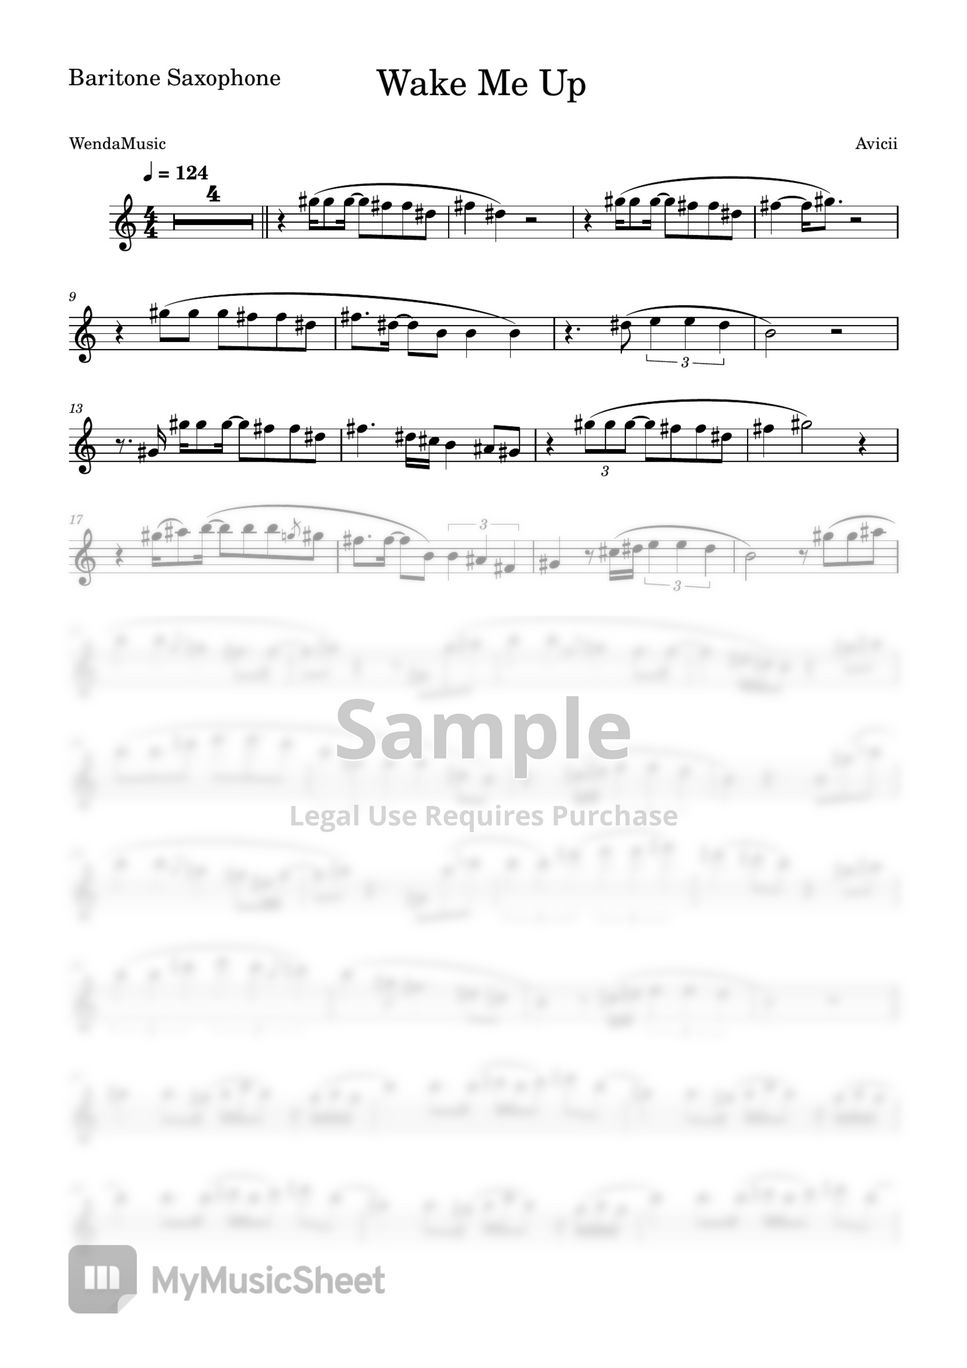 Fifty Fifty - Cupid (Alto Sax) Partitura by WendaMusic